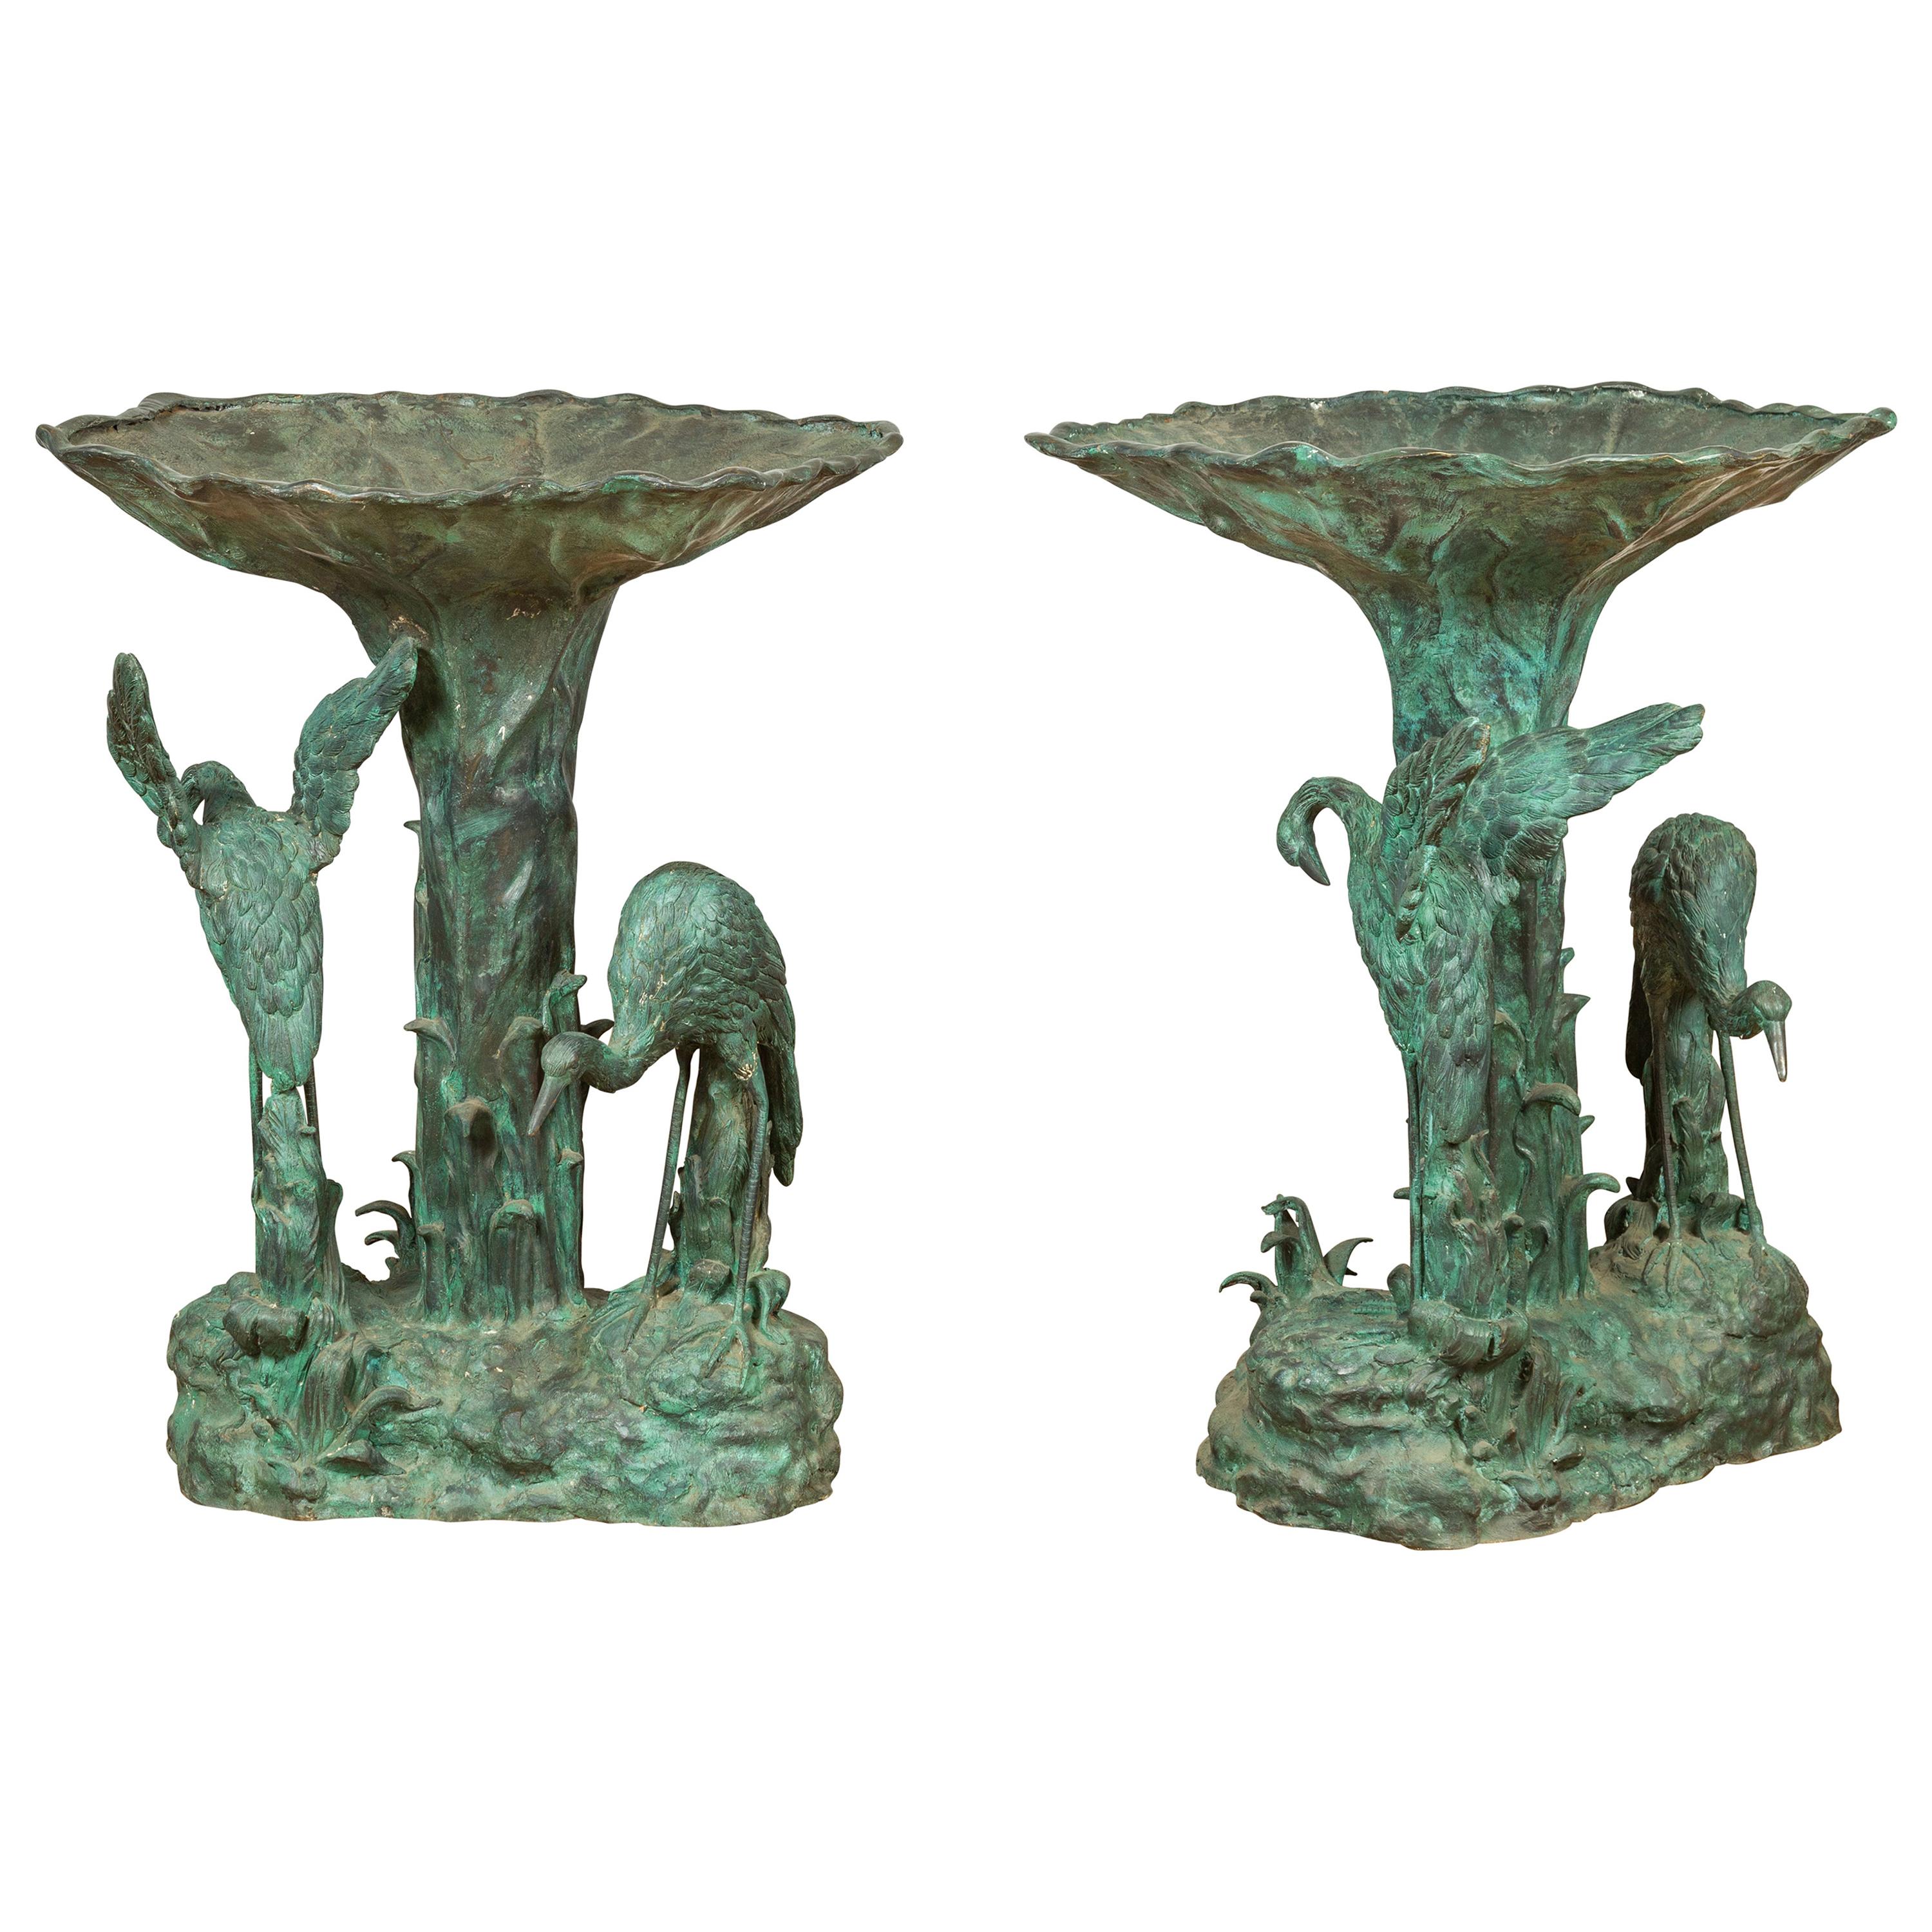 Contemporary Cast Bronze Planter with Cranes and Verdigris Patina, One Available